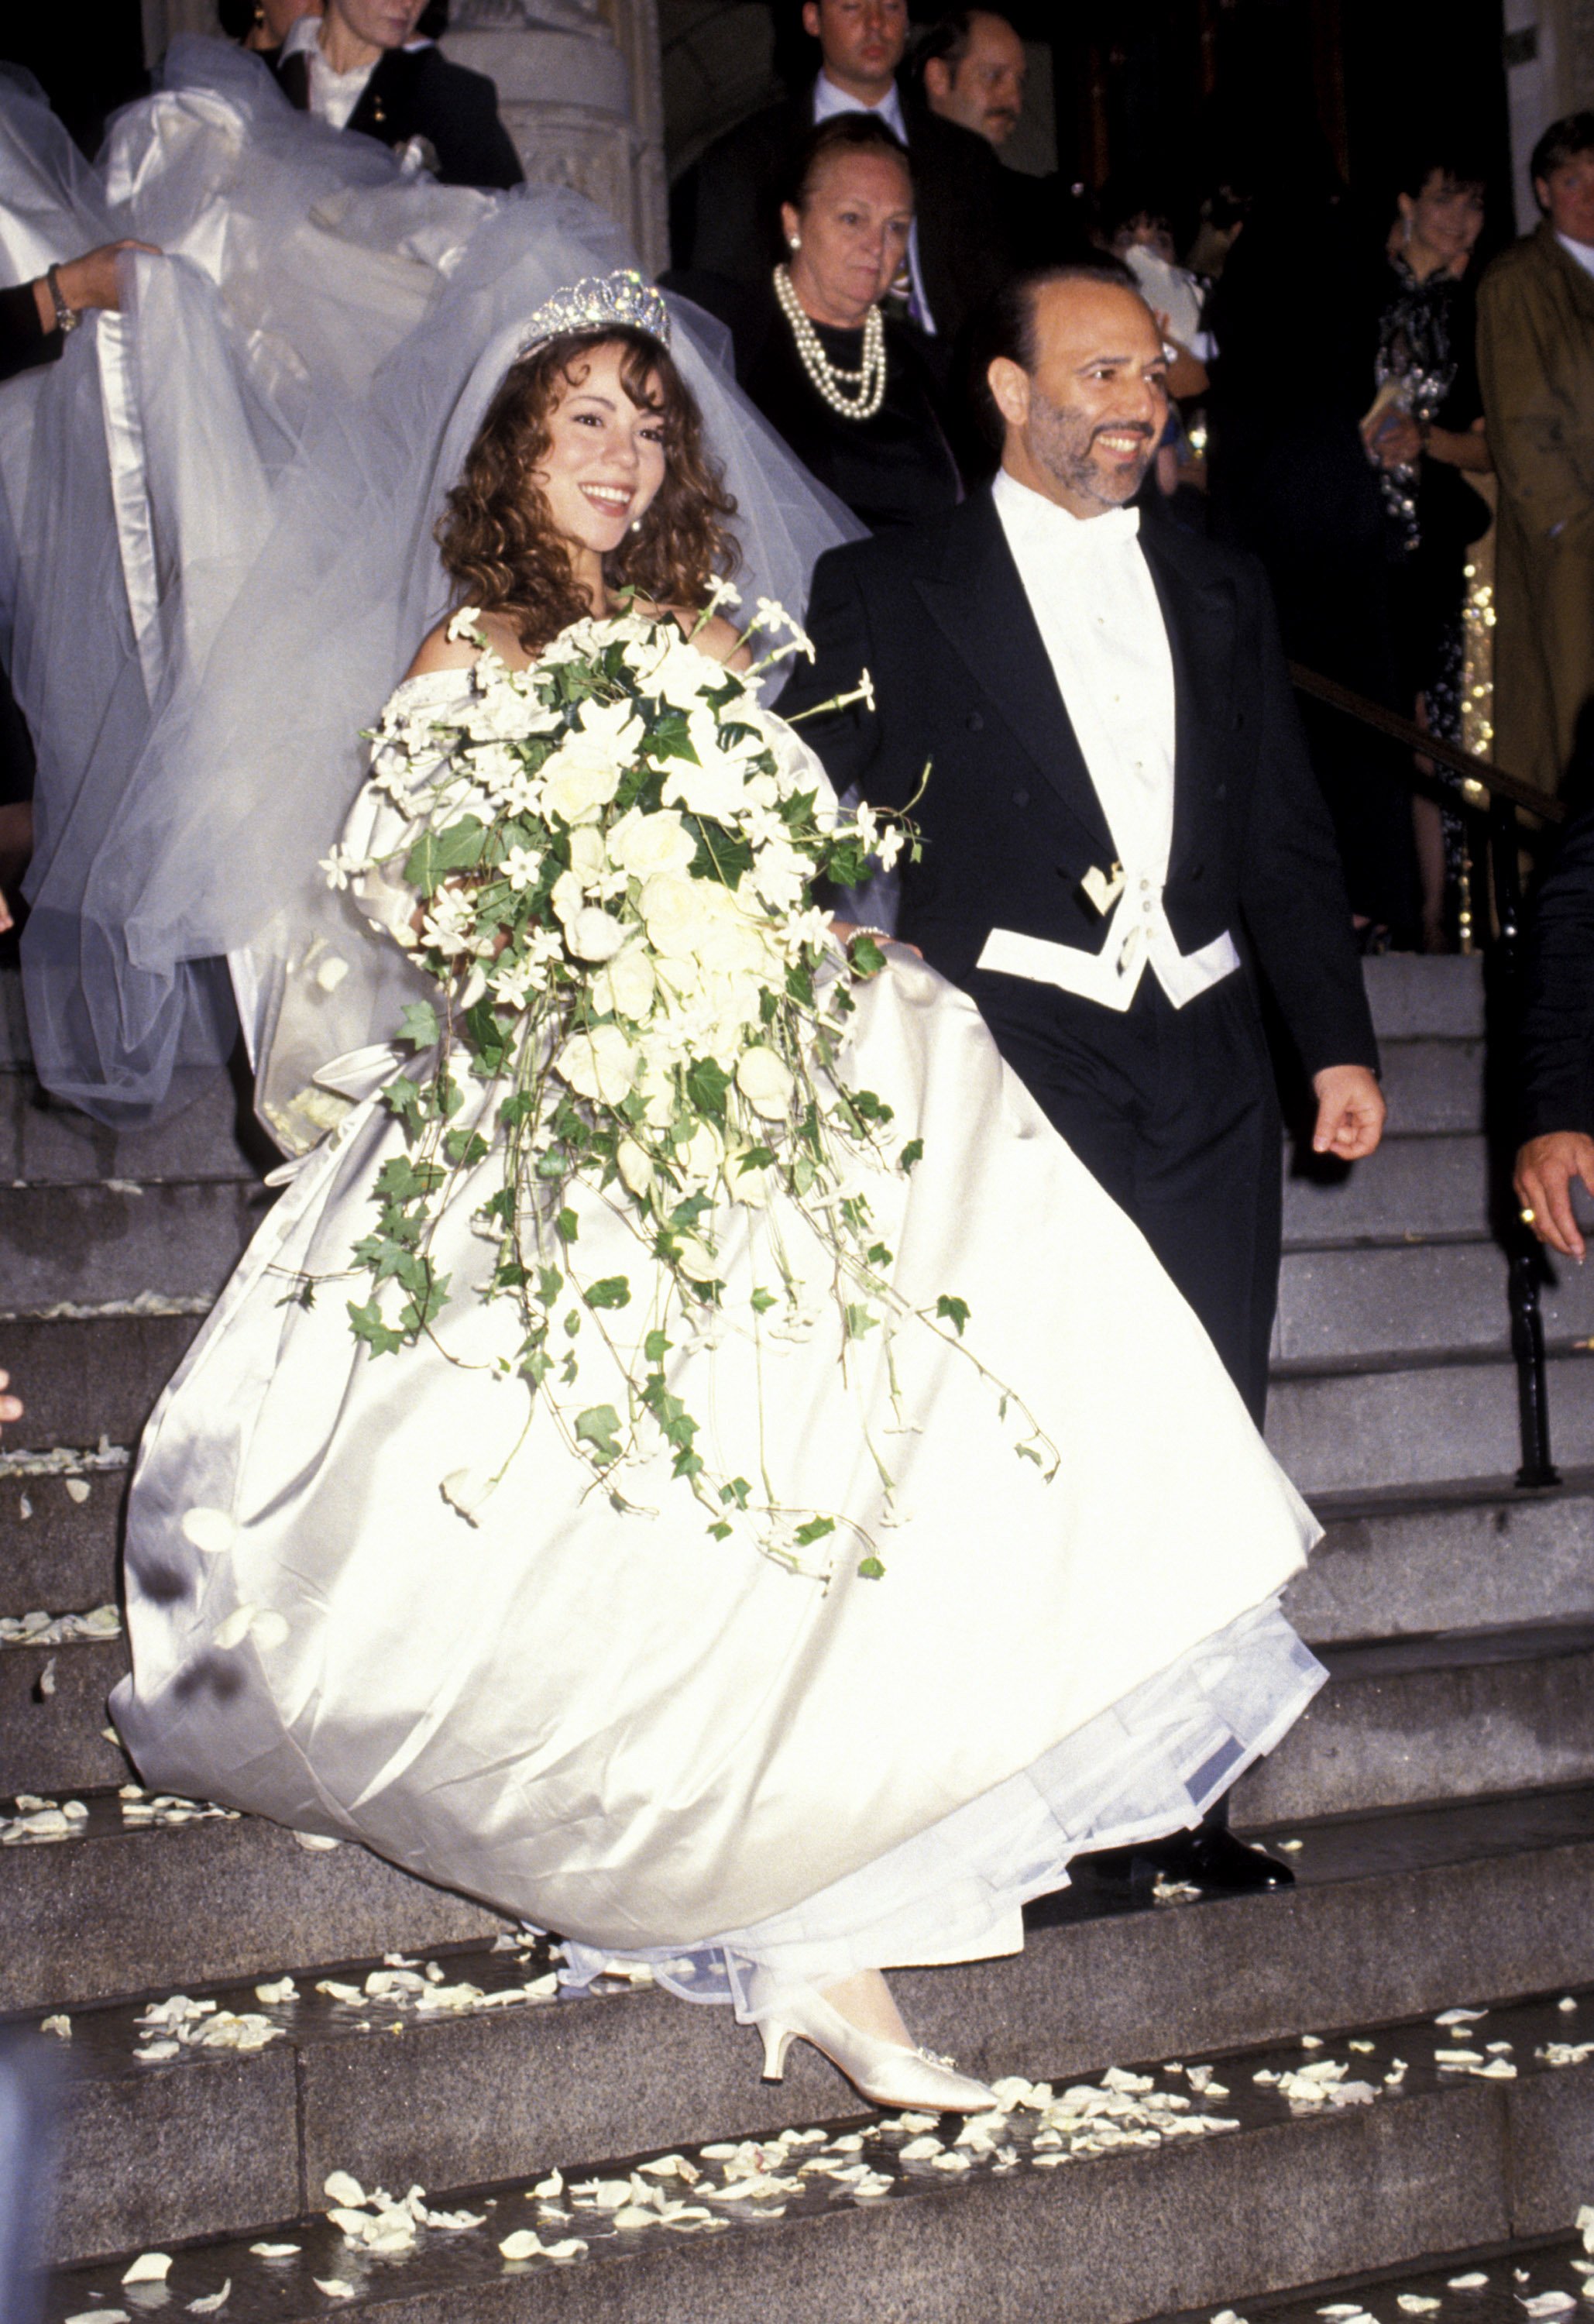 Mariah Carey and Tommy Mottola's wedding